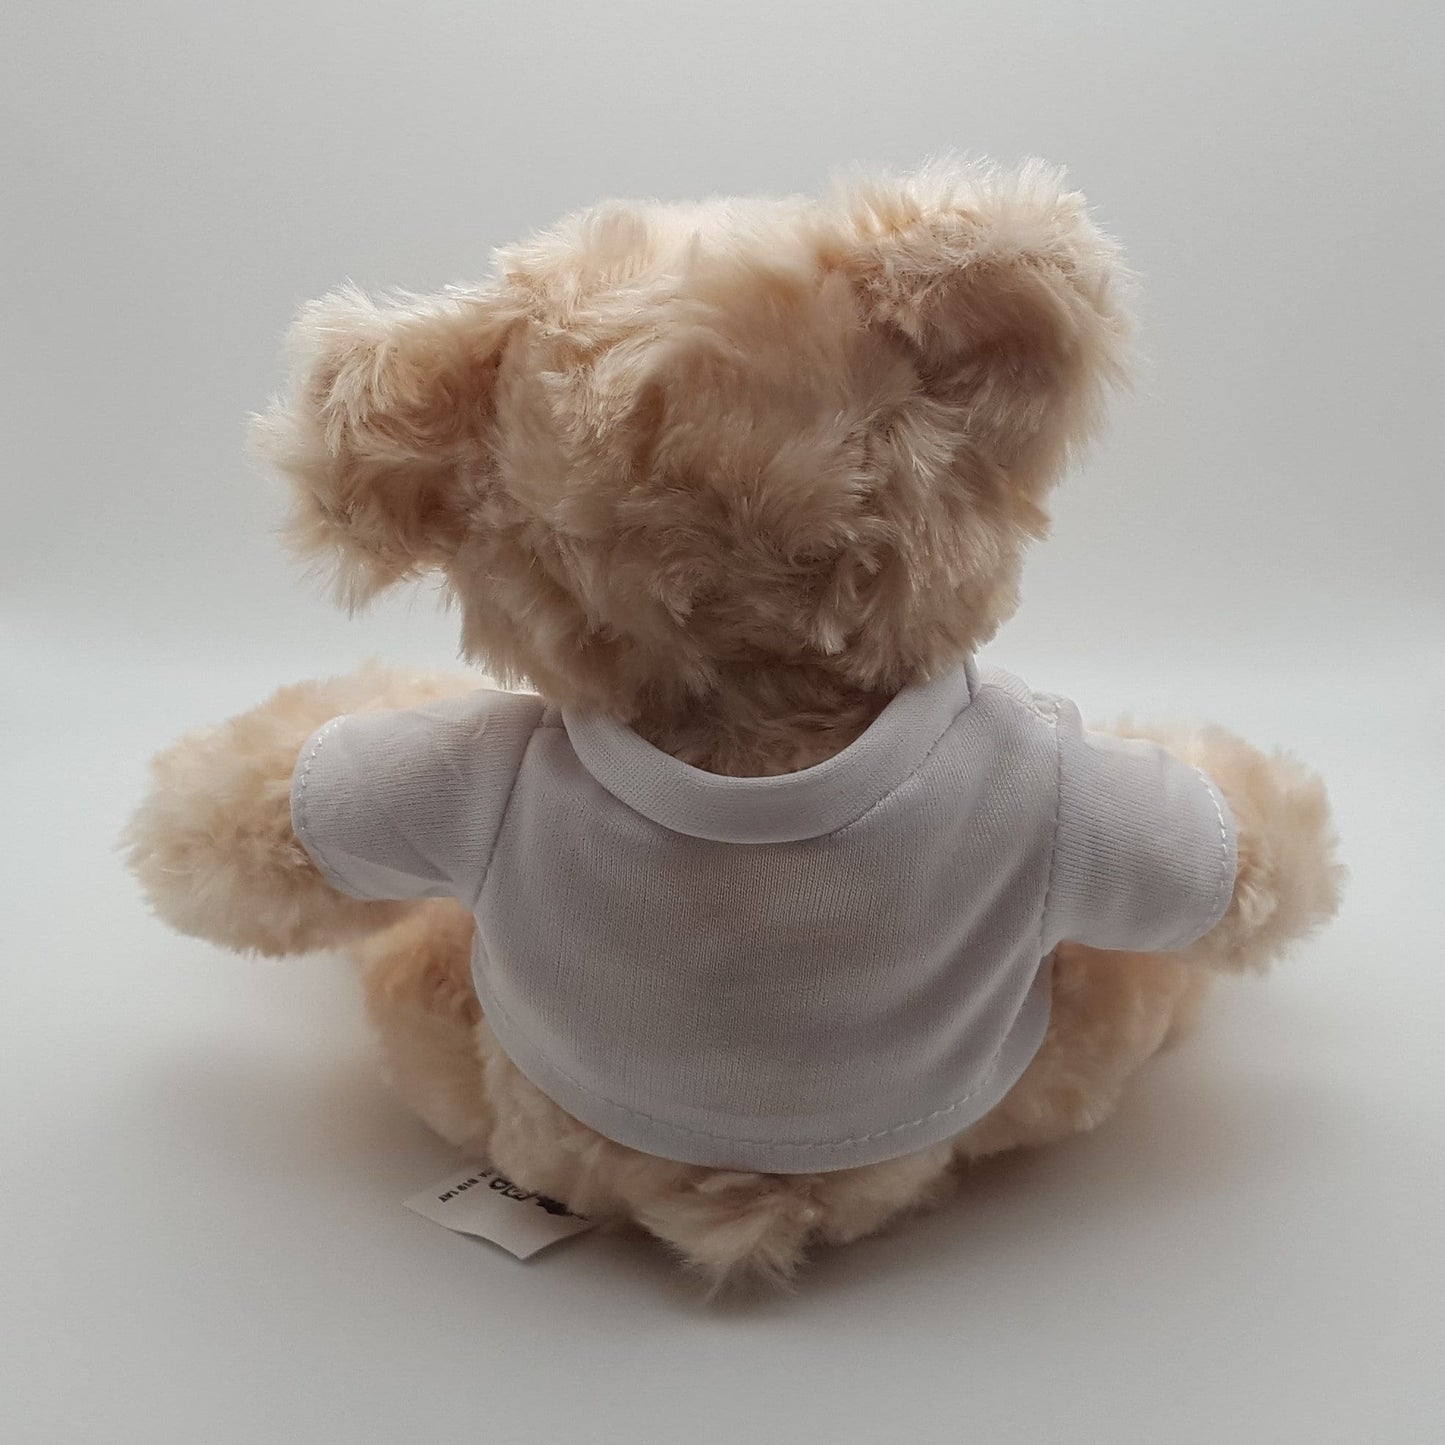 GEORGE Teddy Bear With Personalised Customisable T-Shirt - Add Any Photo/Design/Text